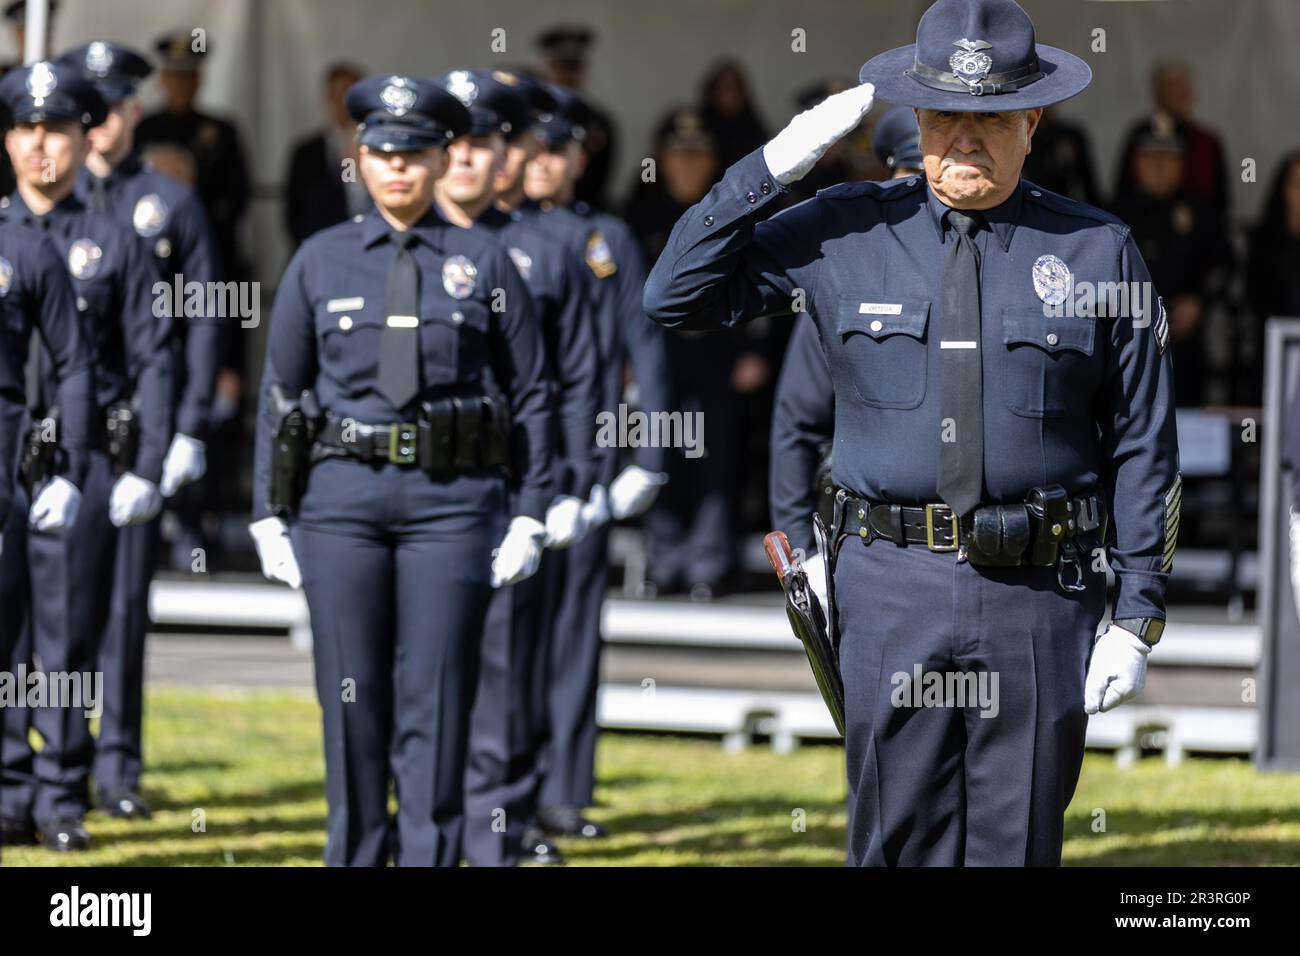 Lapd uniform hi-res stock photography and images - Alamy